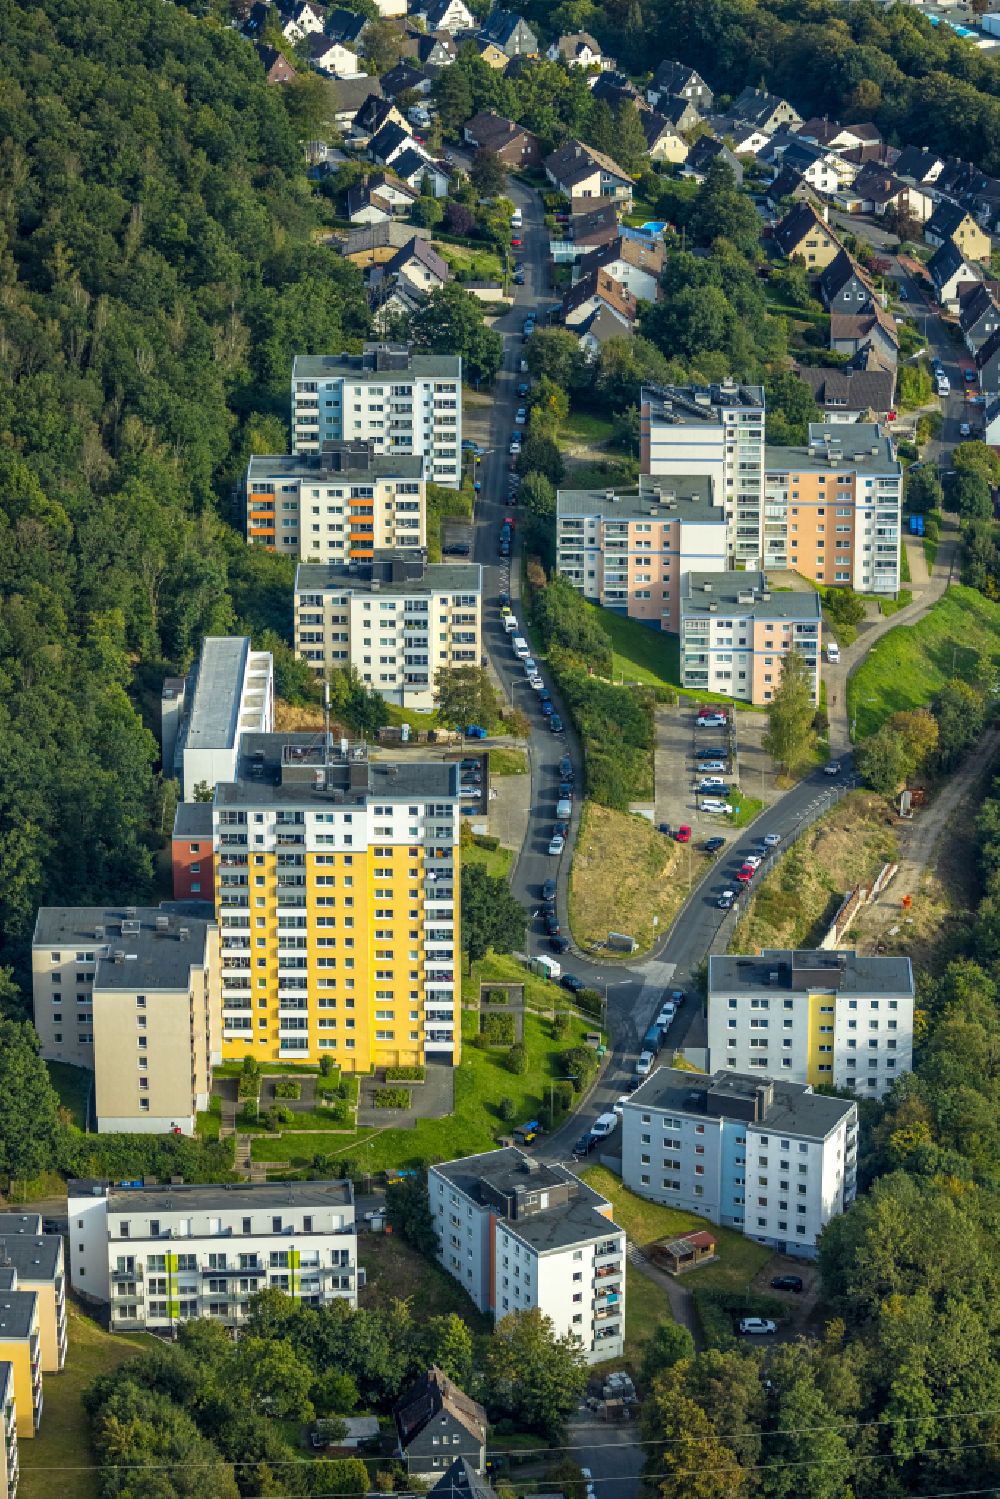 Birlenbach from the bird's eye view: Residential area of industrially manufactured settlement on street Wildweg in Birlenbach at Siegerland in the state North Rhine-Westphalia, Germany